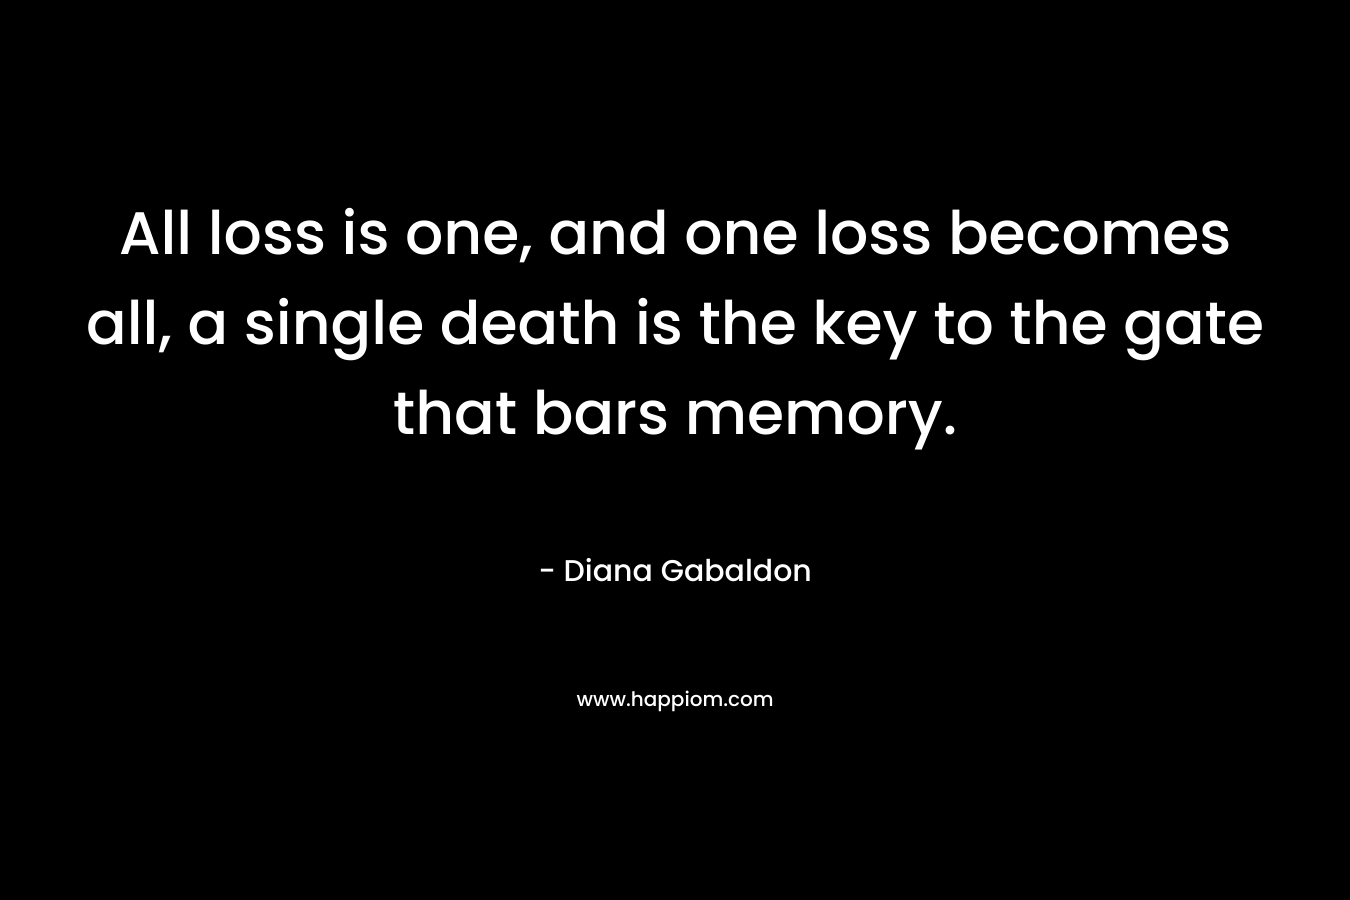 All loss is one, and one loss becomes all, a single death is the key to the gate that bars memory.